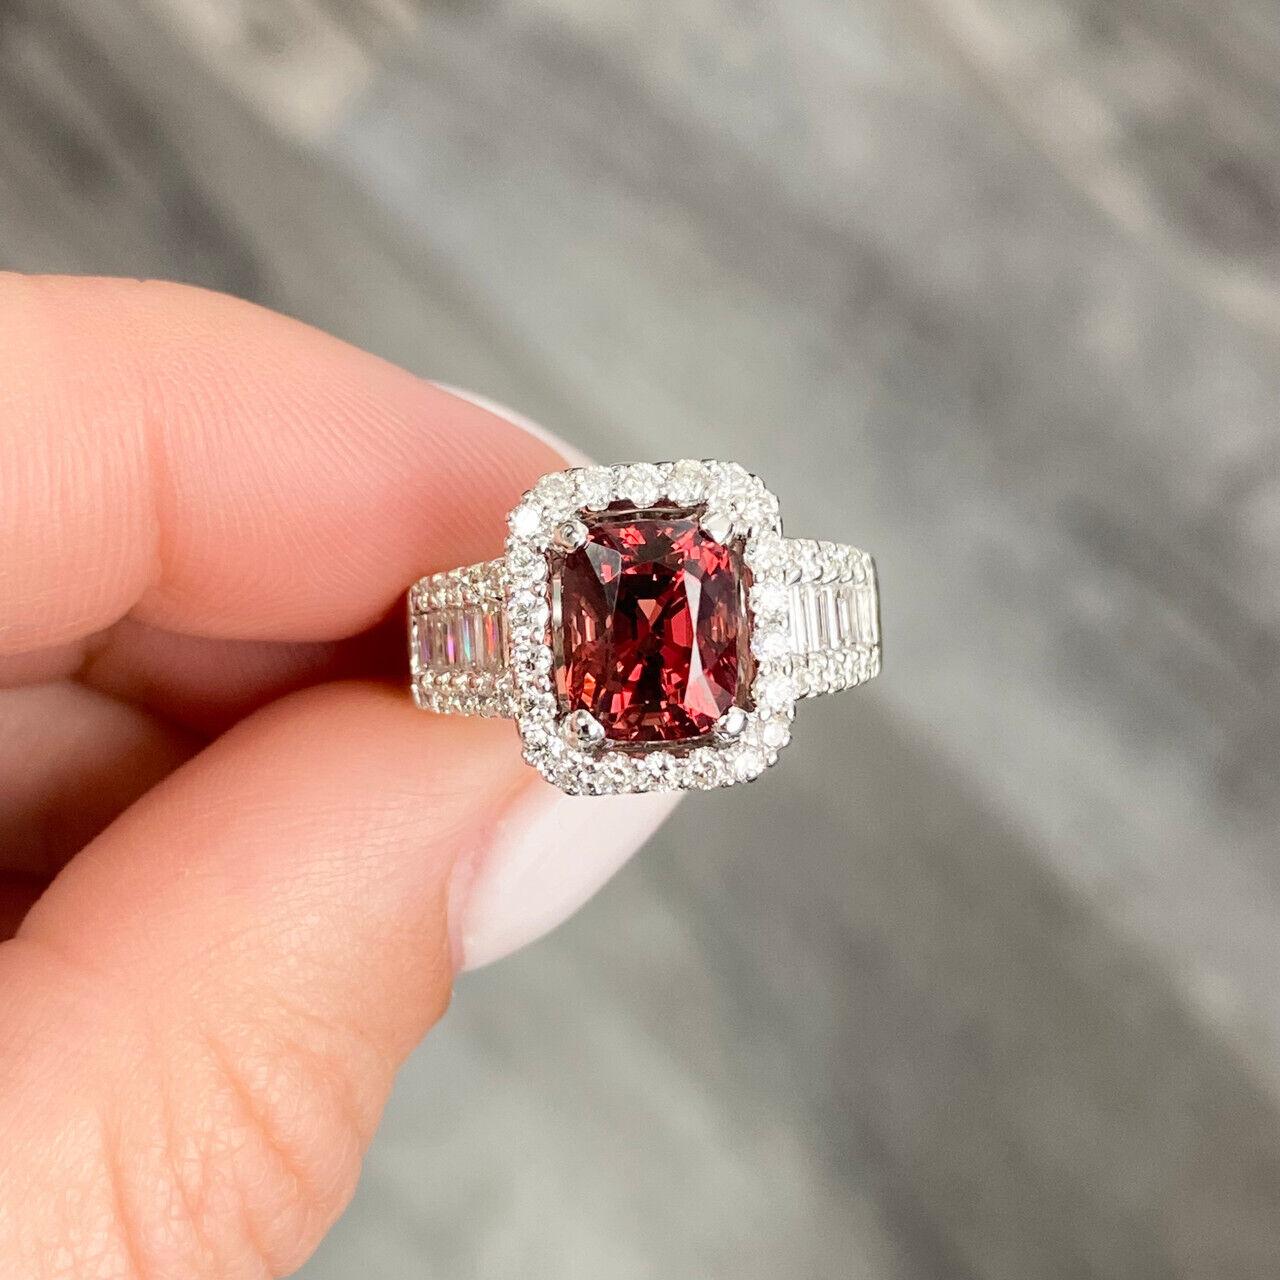 Specifications:
Pre-Owned (Great condition)
Metal: 18K White Gold
Weight: 8gr
Main Stone: 3.07ct Spinel red with brown undertone
Side Stones: Diamonds
Diamond Carat Total Weight: Approximately 1.23ctw
Color: G
Clarity: SI
Size: 6.5US





